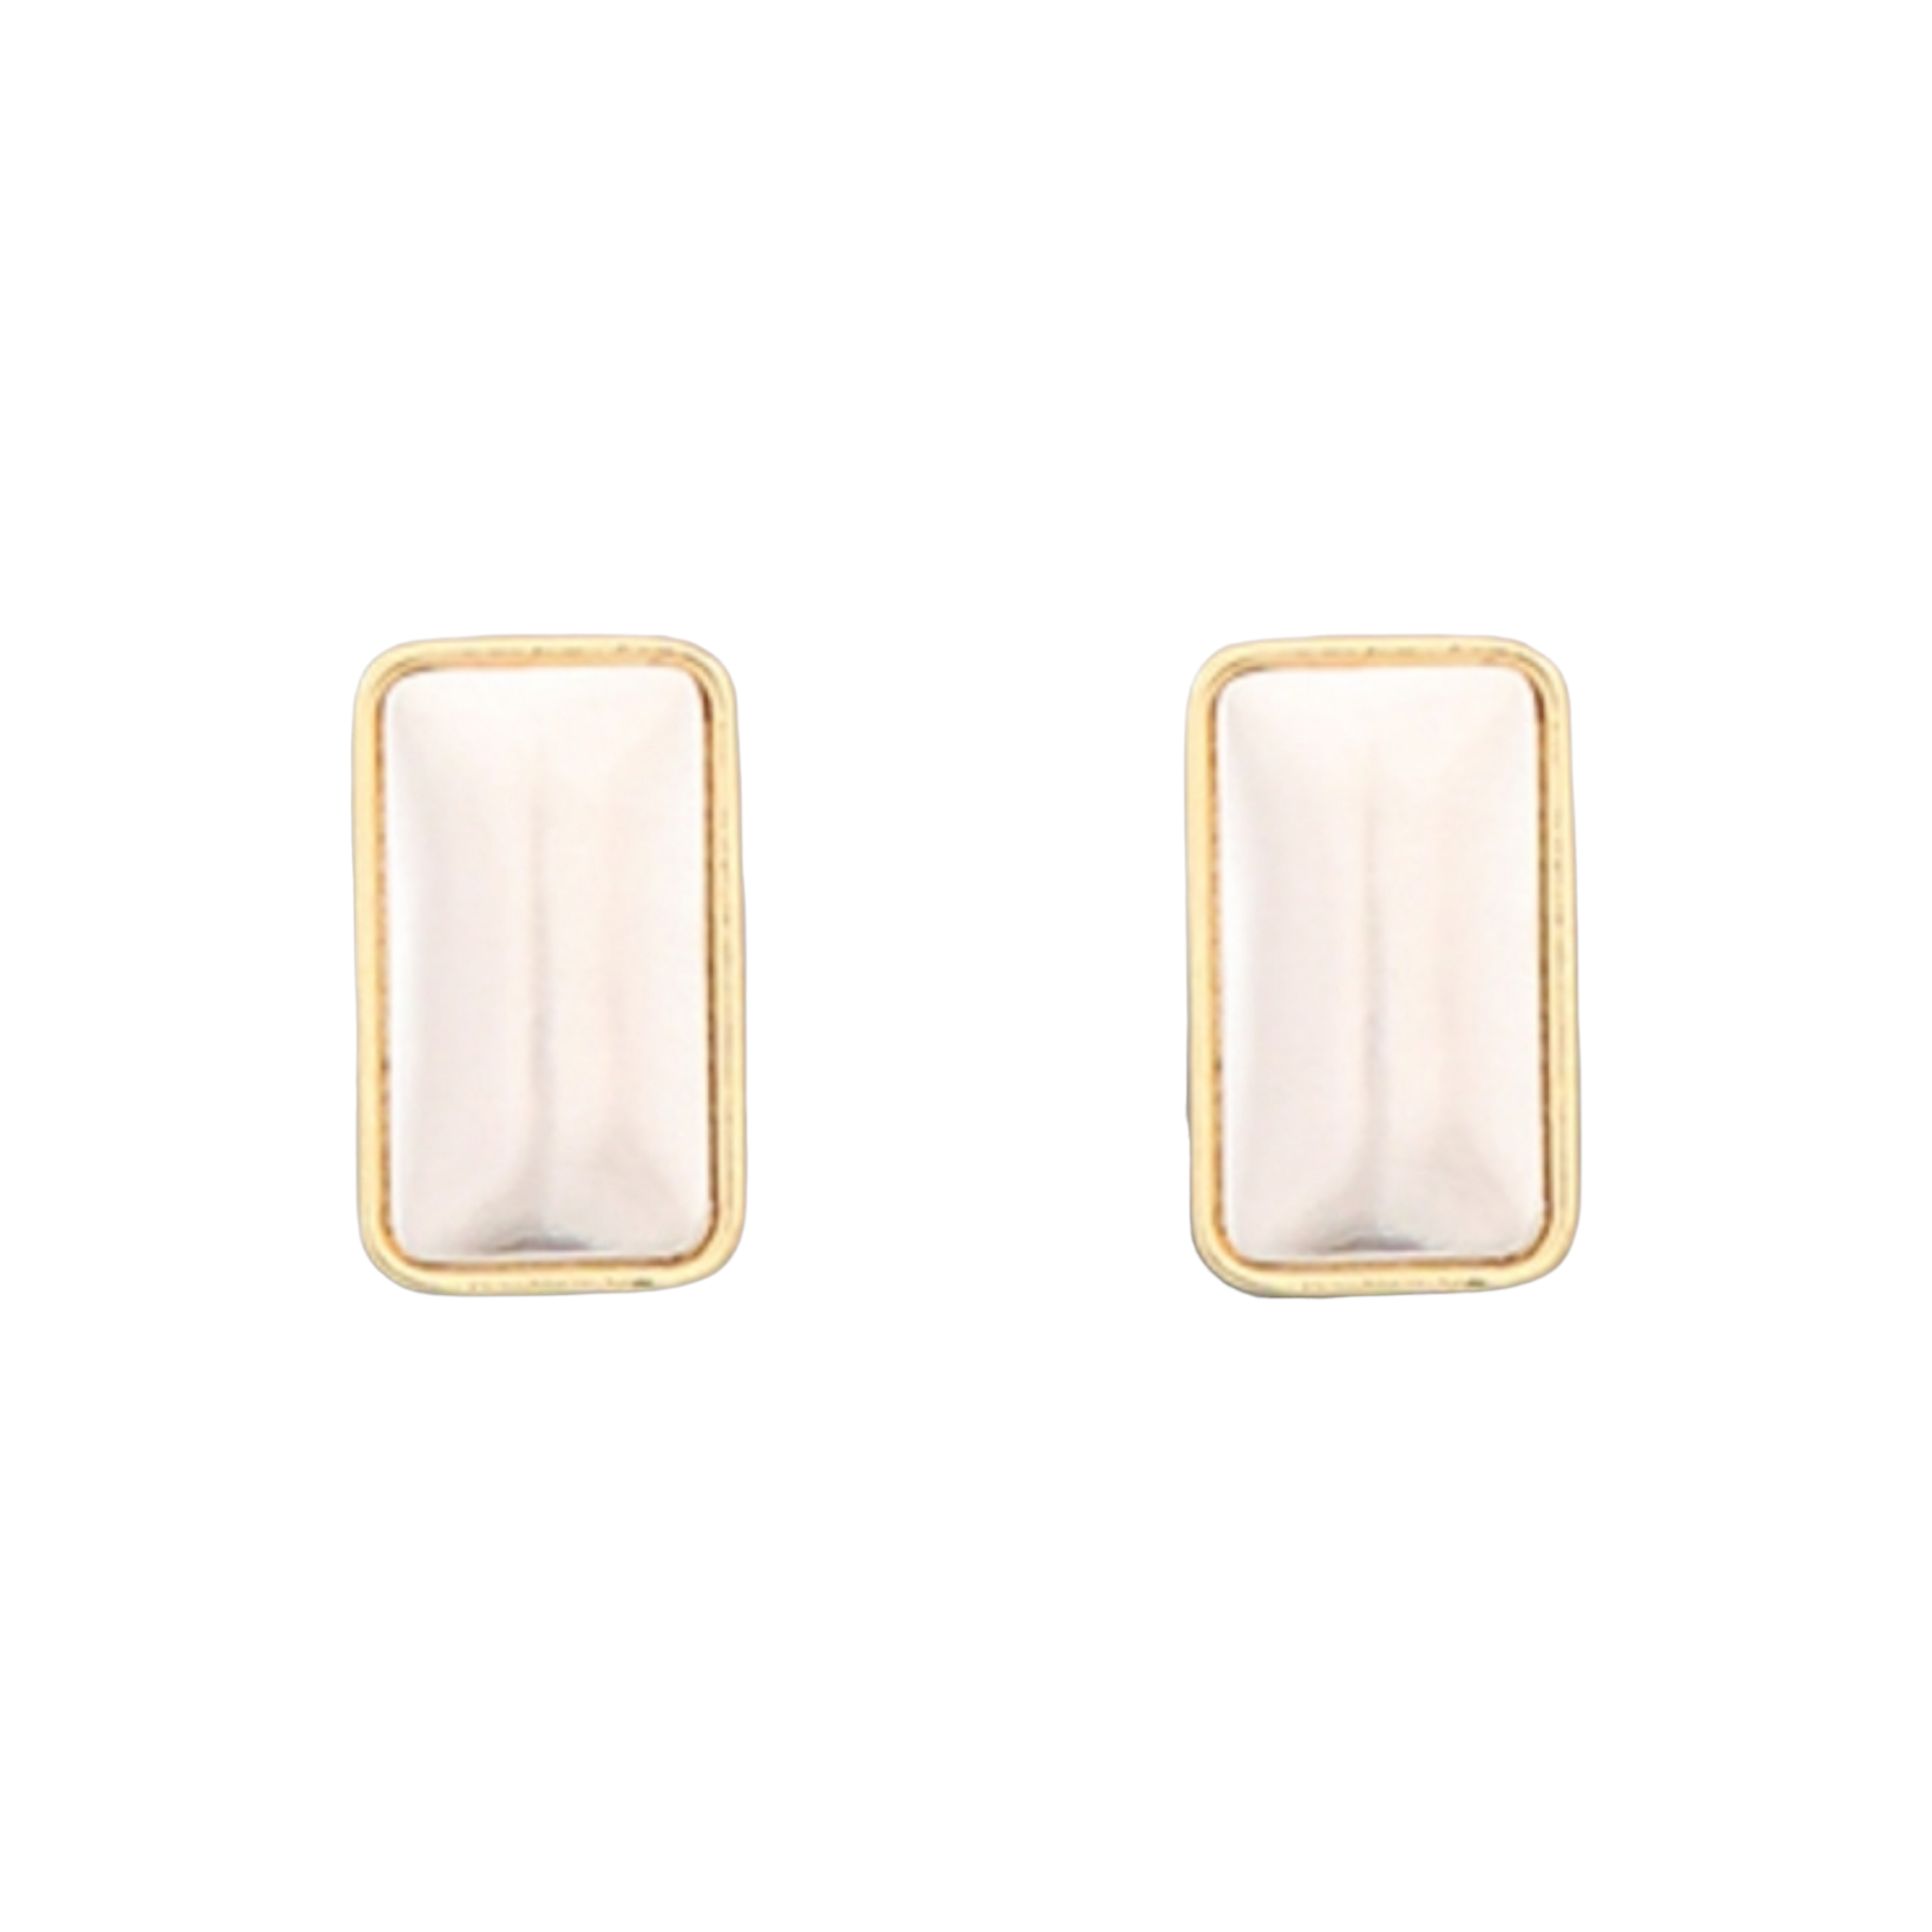 Silver & Gold Rectangle Studs-Earrings-louisgeorgeboutique-LouisGeorge Boutique, Women’s Fashion Boutique Located in Trussville, Alabama